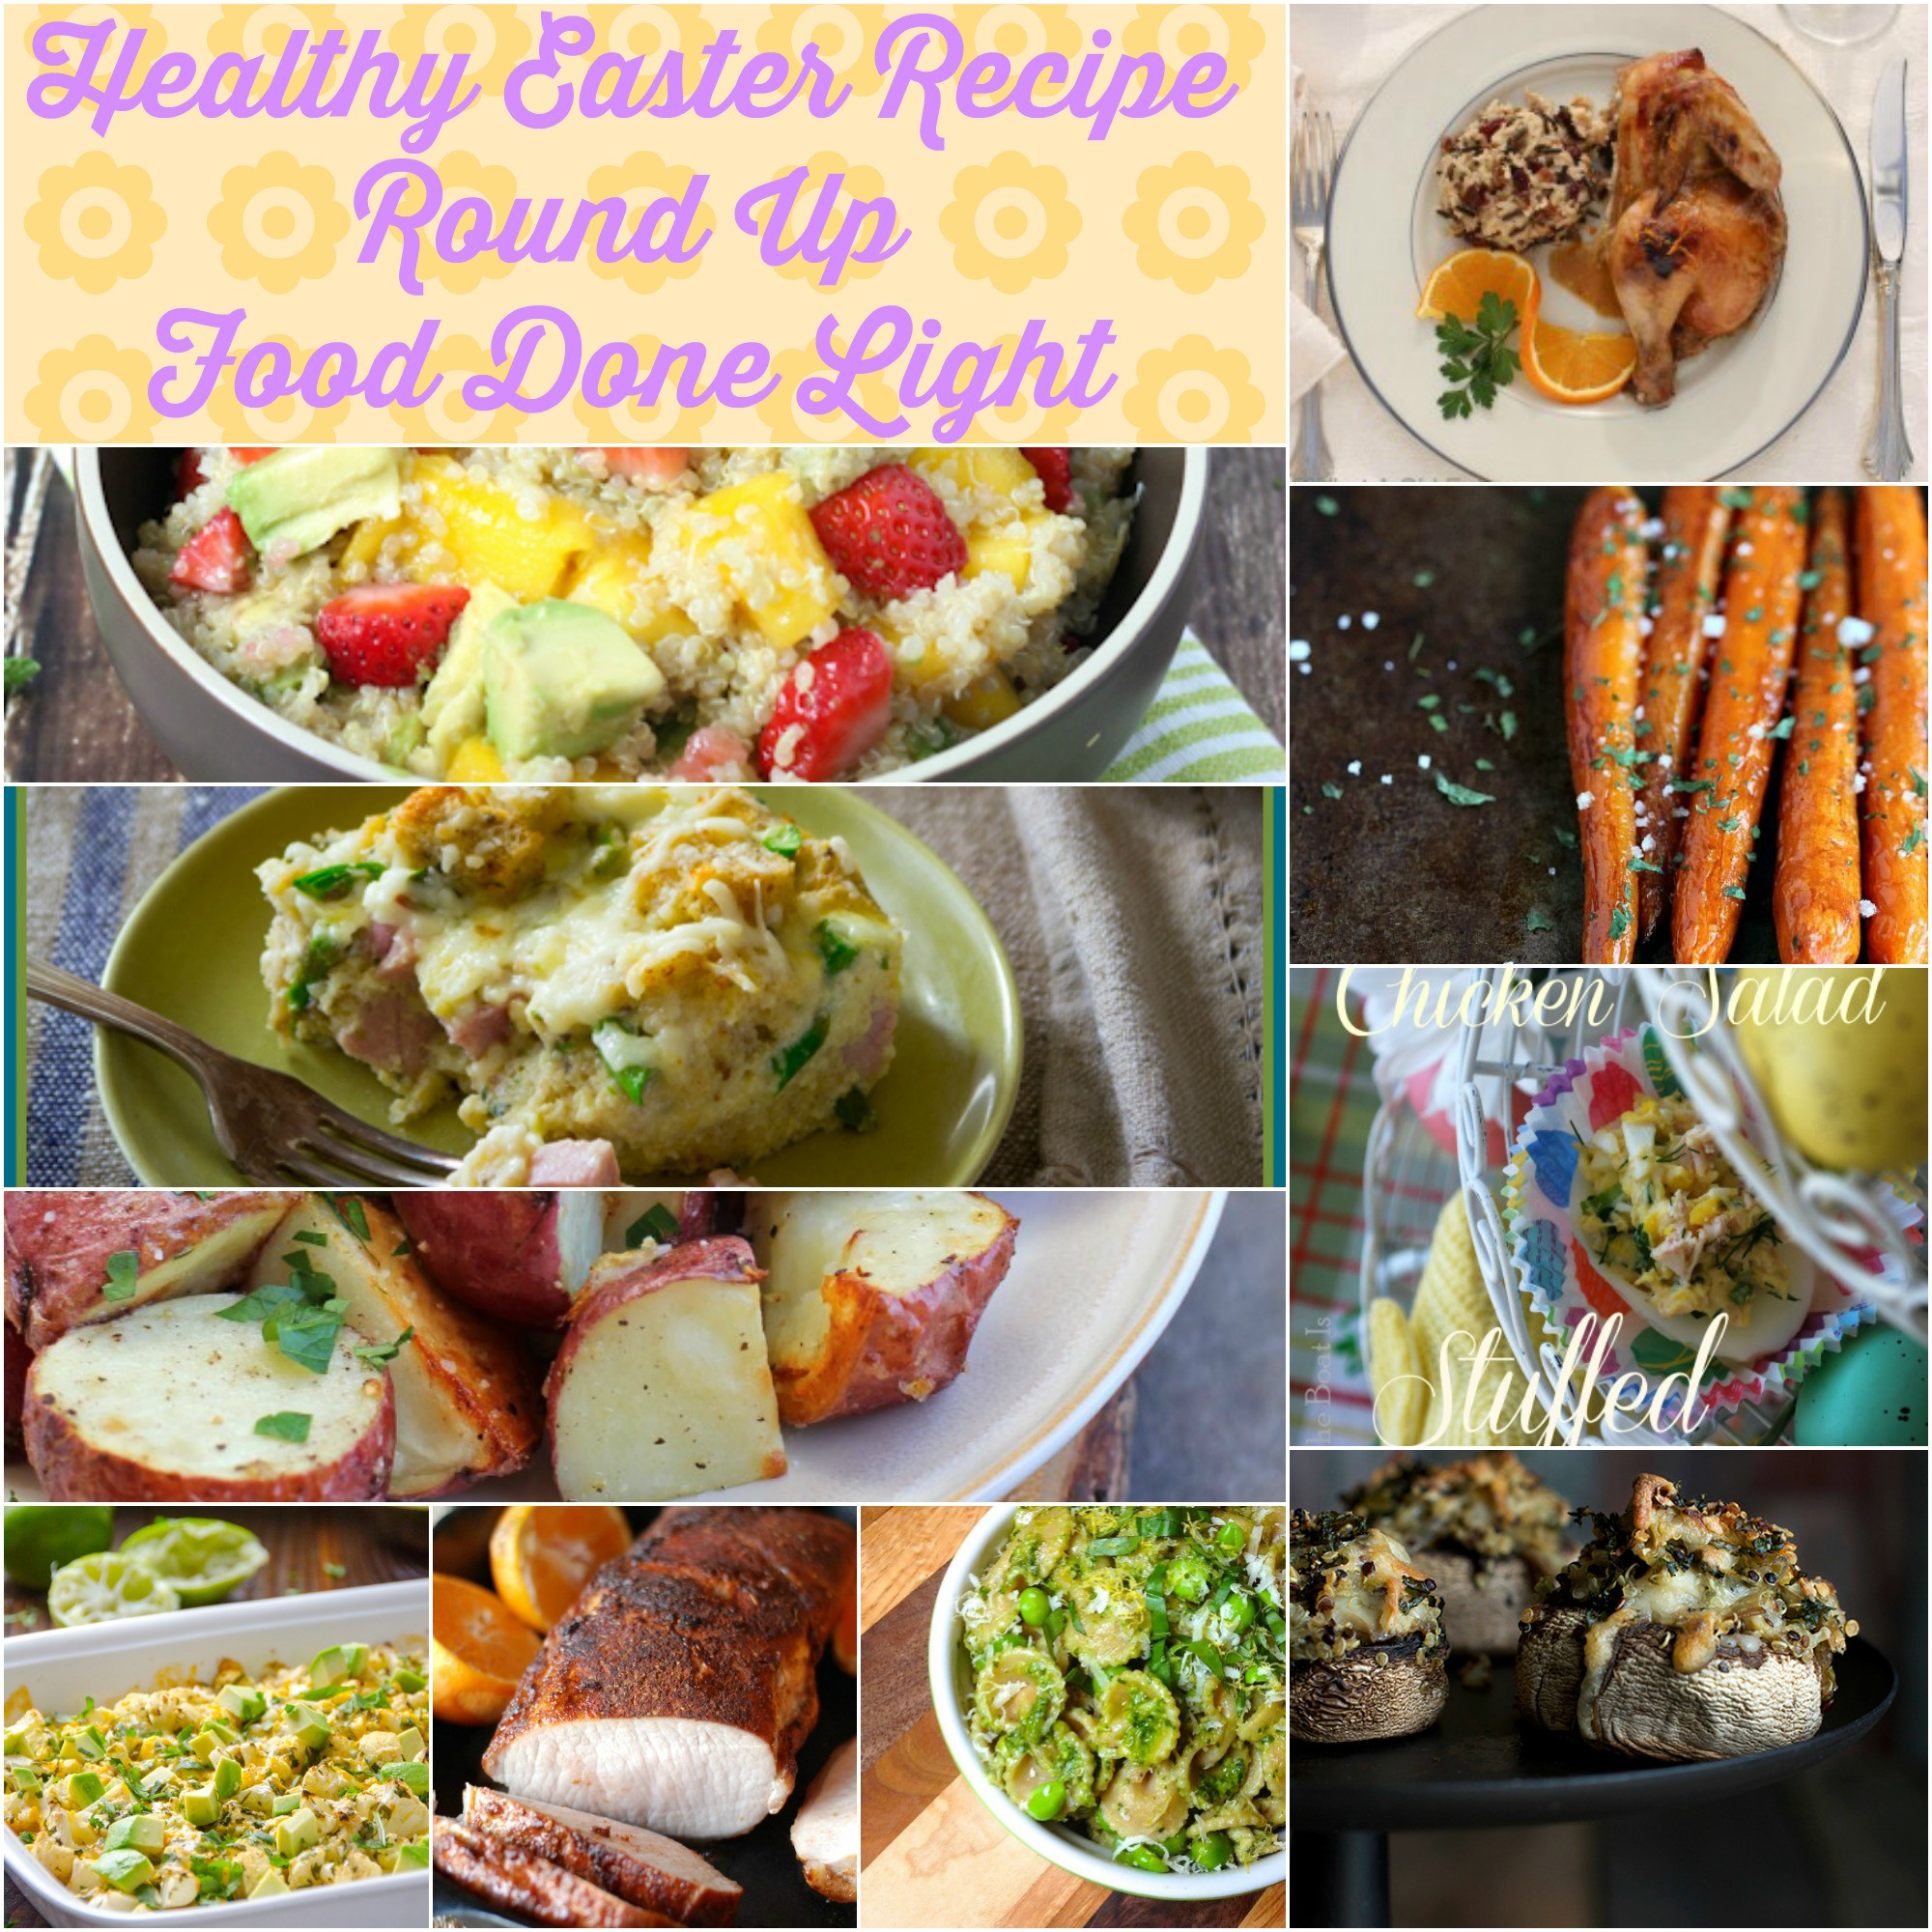 Healthy Easter Dinner Recipes
 Healthy Easter Recipe Round Up Food Done Light